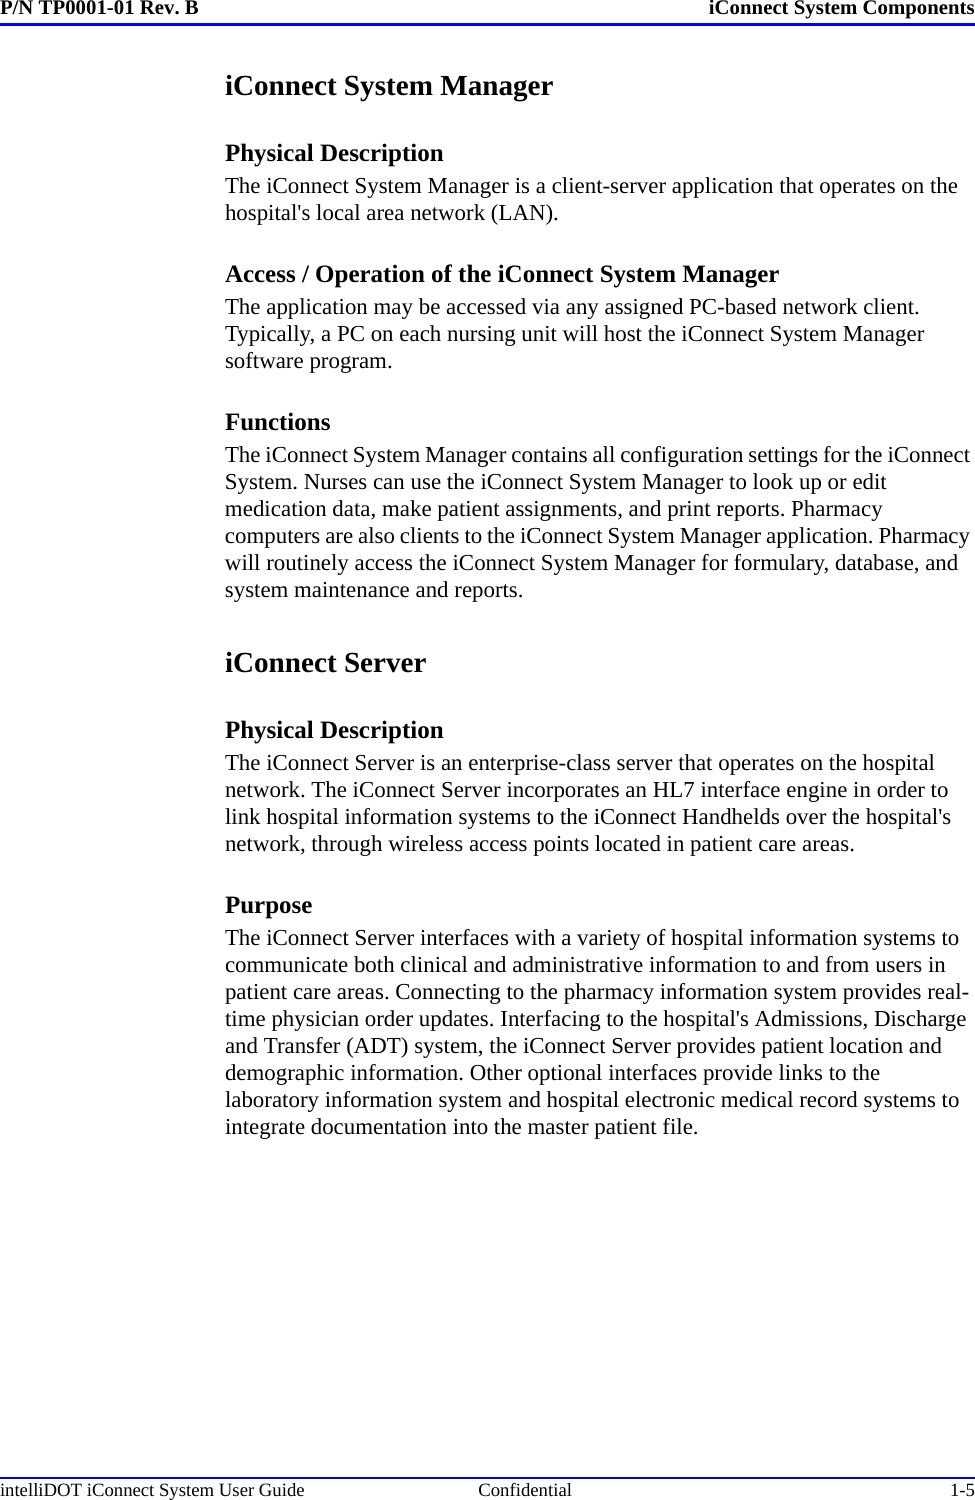 P/N TP0001-01 Rev. B iConnect System ComponentsintelliDOT iConnect System User Guide  Confidential 1-5iConnect System ManagerPhysical DescriptionThe iConnect System Manager is a client-server application that operates on the hospital&apos;s local area network (LAN).Access / Operation of the iConnect System ManagerThe application may be accessed via any assigned PC-based network client. Typically, a PC on each nursing unit will host the iConnect System Manager software program.FunctionsThe iConnect System Manager contains all configuration settings for the iConnect System. Nurses can use the iConnect System Manager to look up or edit medication data, make patient assignments, and print reports. Pharmacy computers are also clients to the iConnect System Manager application. Pharmacy will routinely access the iConnect System Manager for formulary, database, and system maintenance and reports.iConnect ServerPhysical DescriptionThe iConnect Server is an enterprise-class server that operates on the hospital network. The iConnect Server incorporates an HL7 interface engine in order to link hospital information systems to the iConnect Handhelds over the hospital&apos;s network, through wireless access points located in patient care areas.PurposeThe iConnect Server interfaces with a variety of hospital information systems to communicate both clinical and administrative information to and from users in patient care areas. Connecting to the pharmacy information system provides real-time physician order updates. Interfacing to the hospital&apos;s Admissions, Discharge and Transfer (ADT) system, the iConnect Server provides patient location and demographic information. Other optional interfaces provide links to the laboratory information system and hospital electronic medical record systems to integrate documentation into the master patient file.